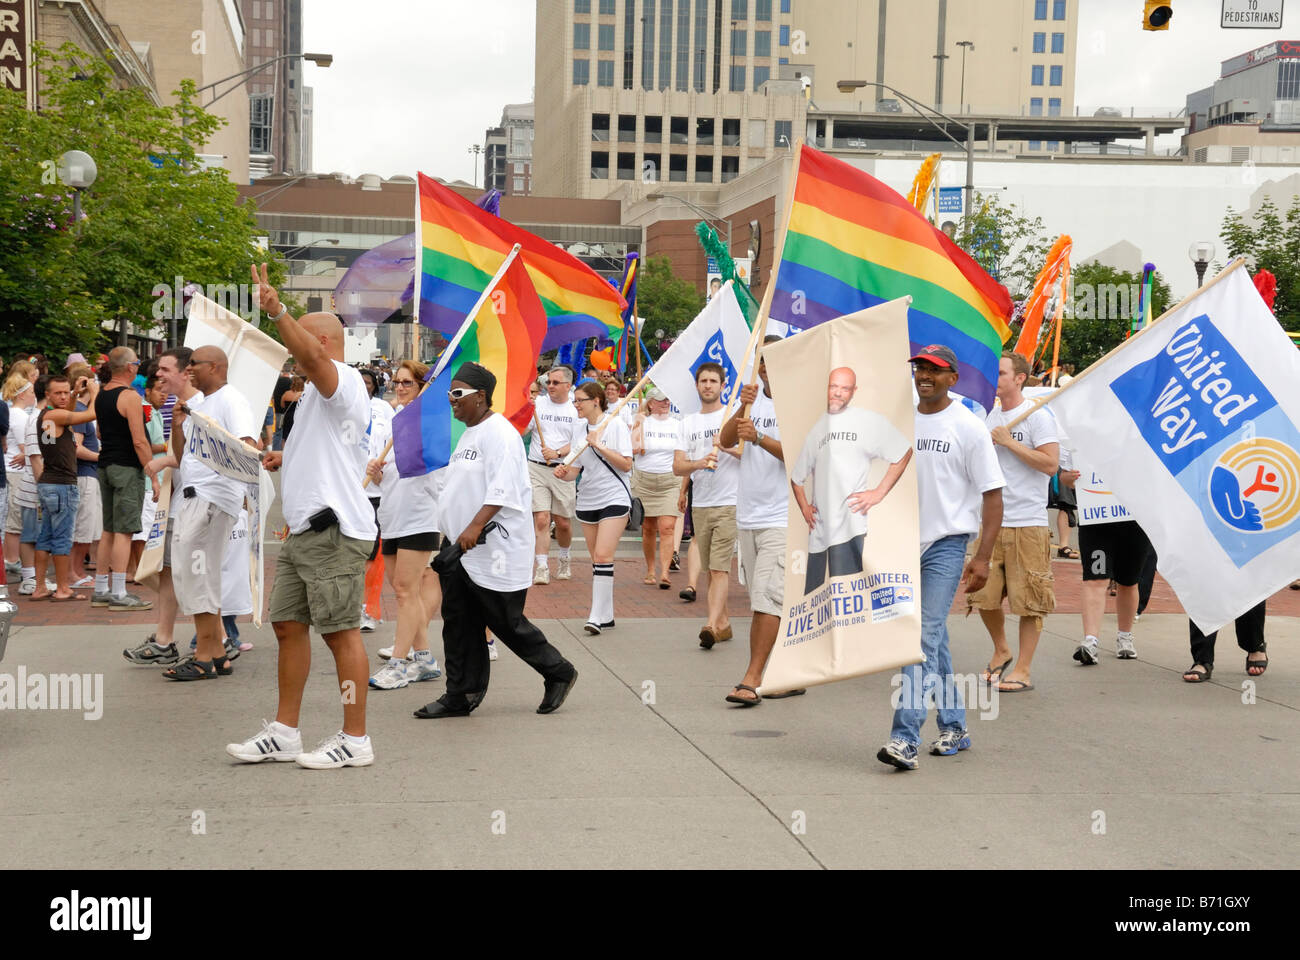 united way marchers carrying rainbow flags and signs in Gay Pride Parade Columbus Ohio 2008 Stock Photo